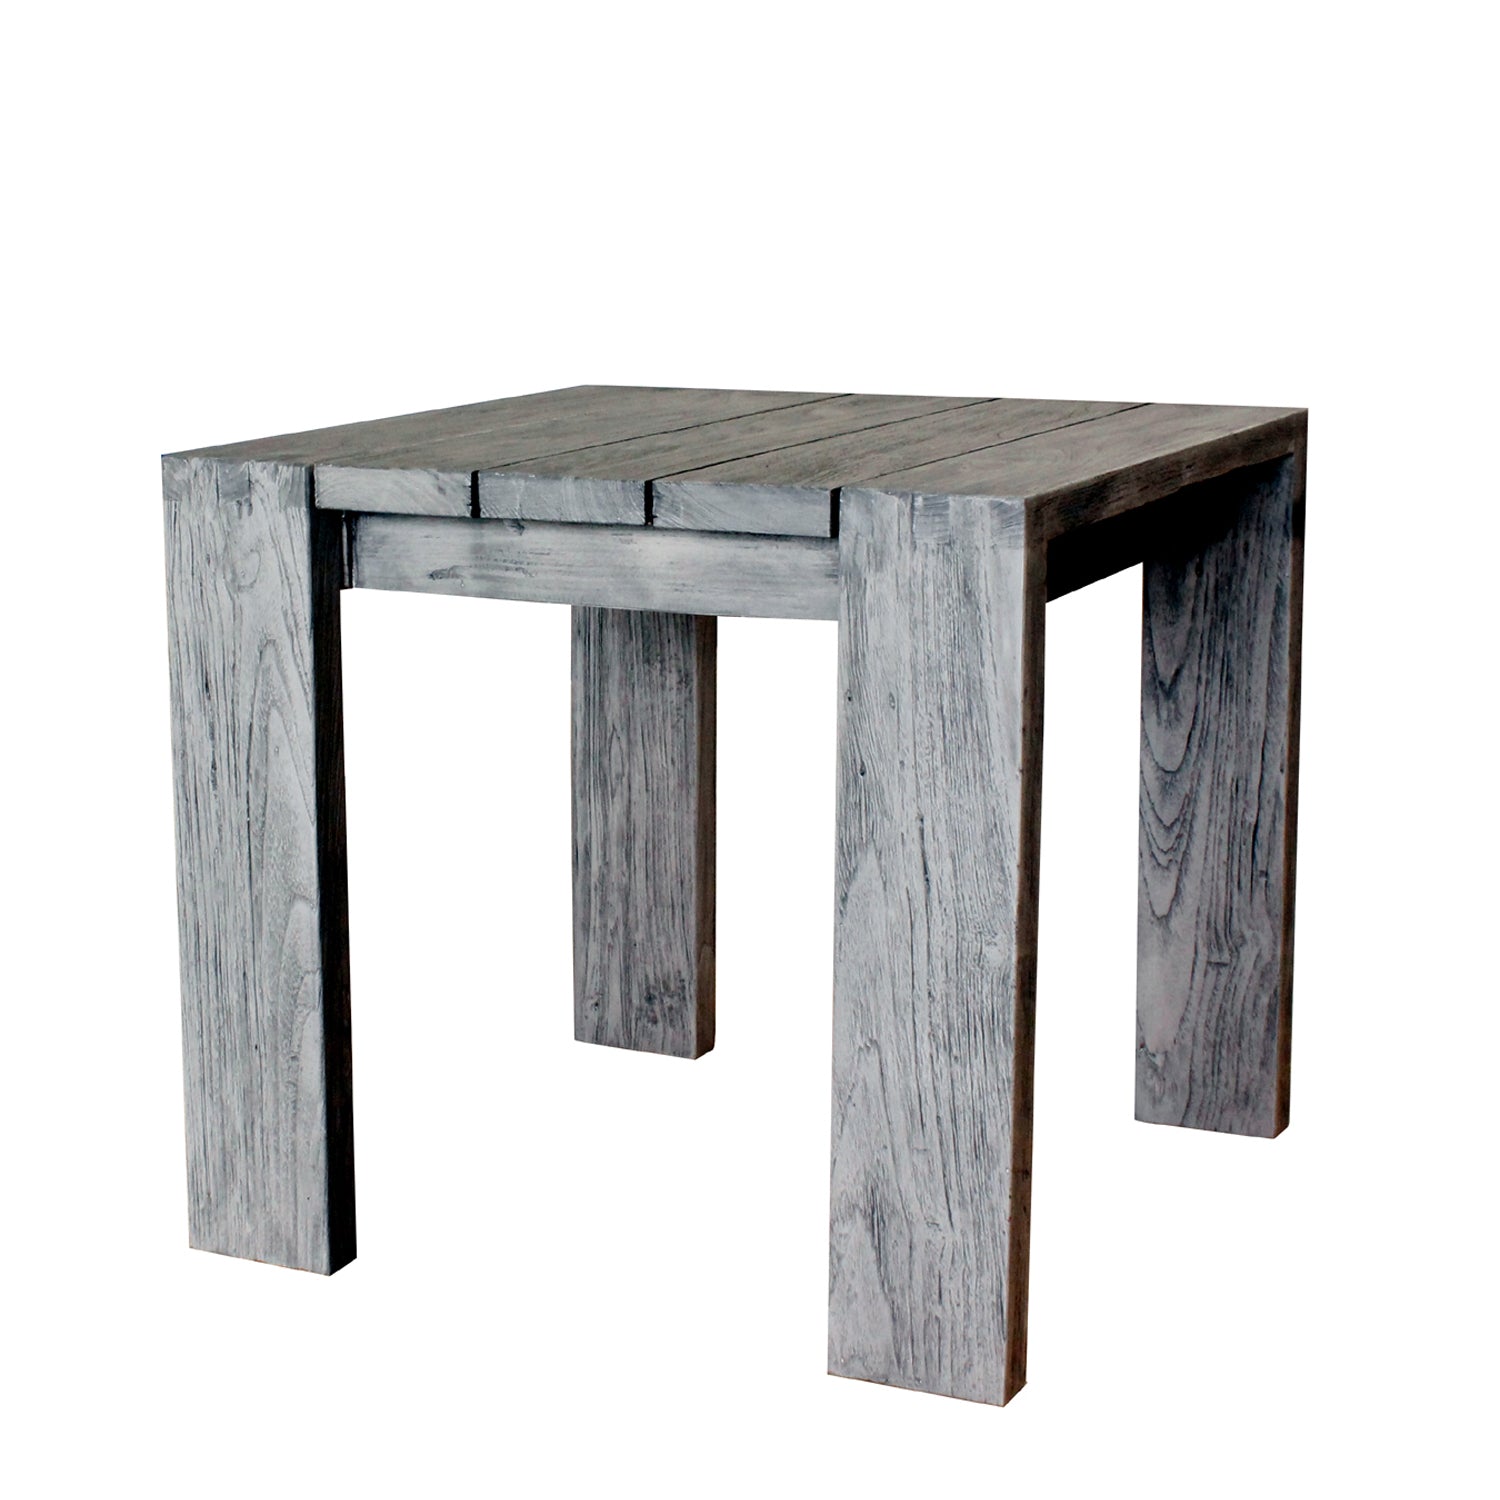 T2-8339 Reclaimed teak wood table top in natural finish